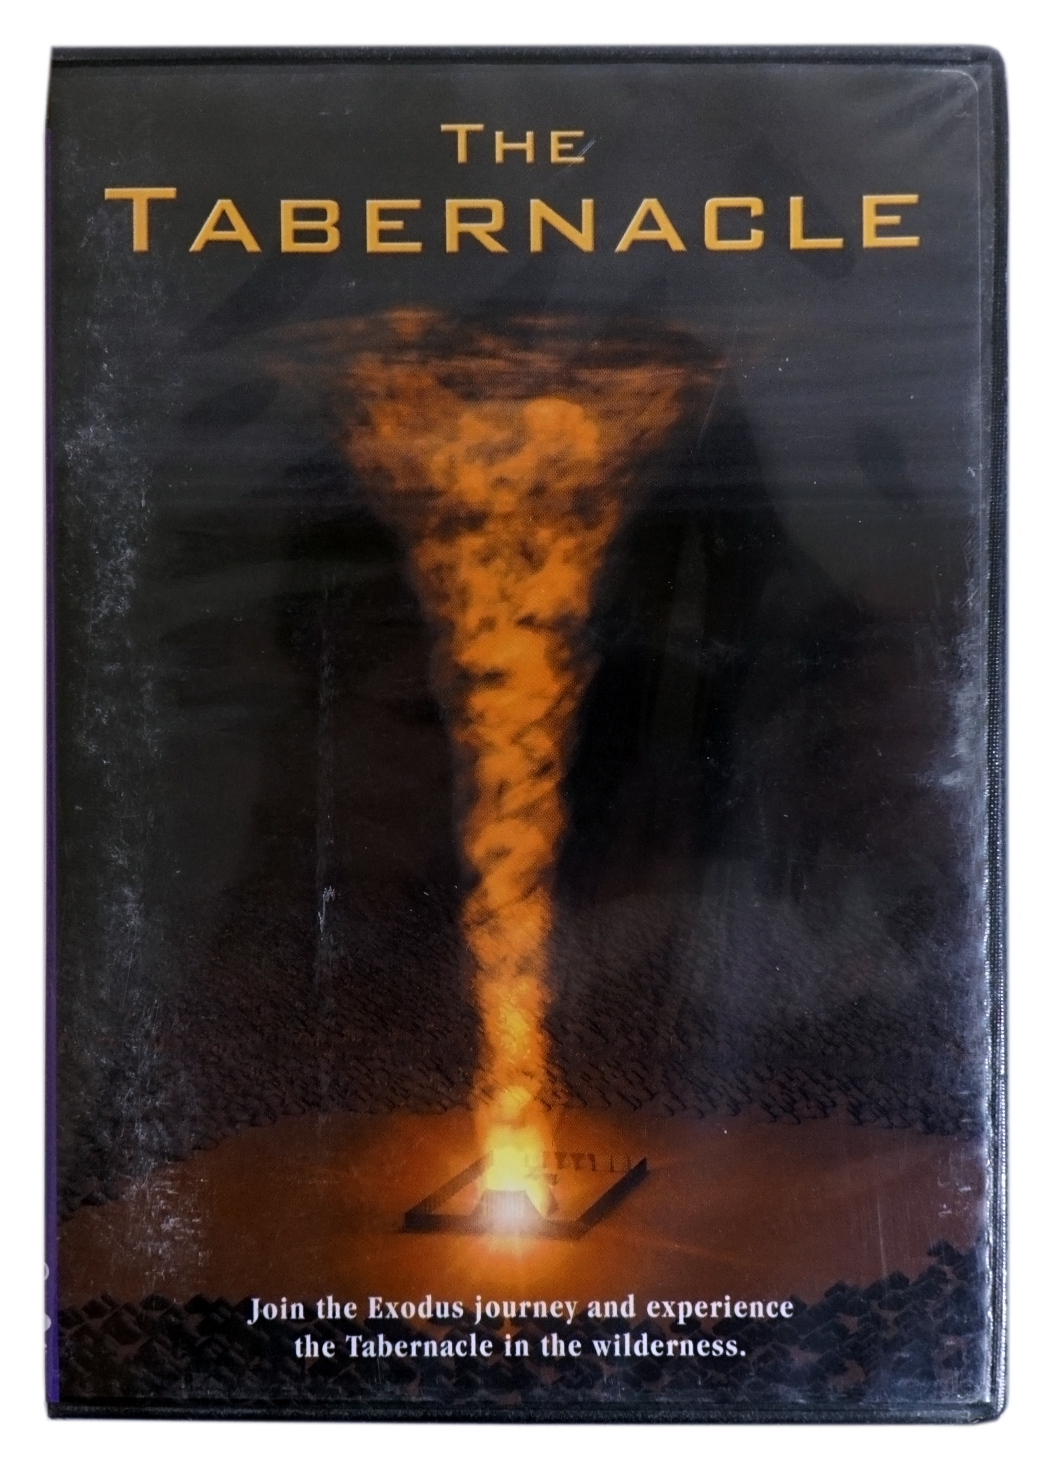 The Tabernacle DVD